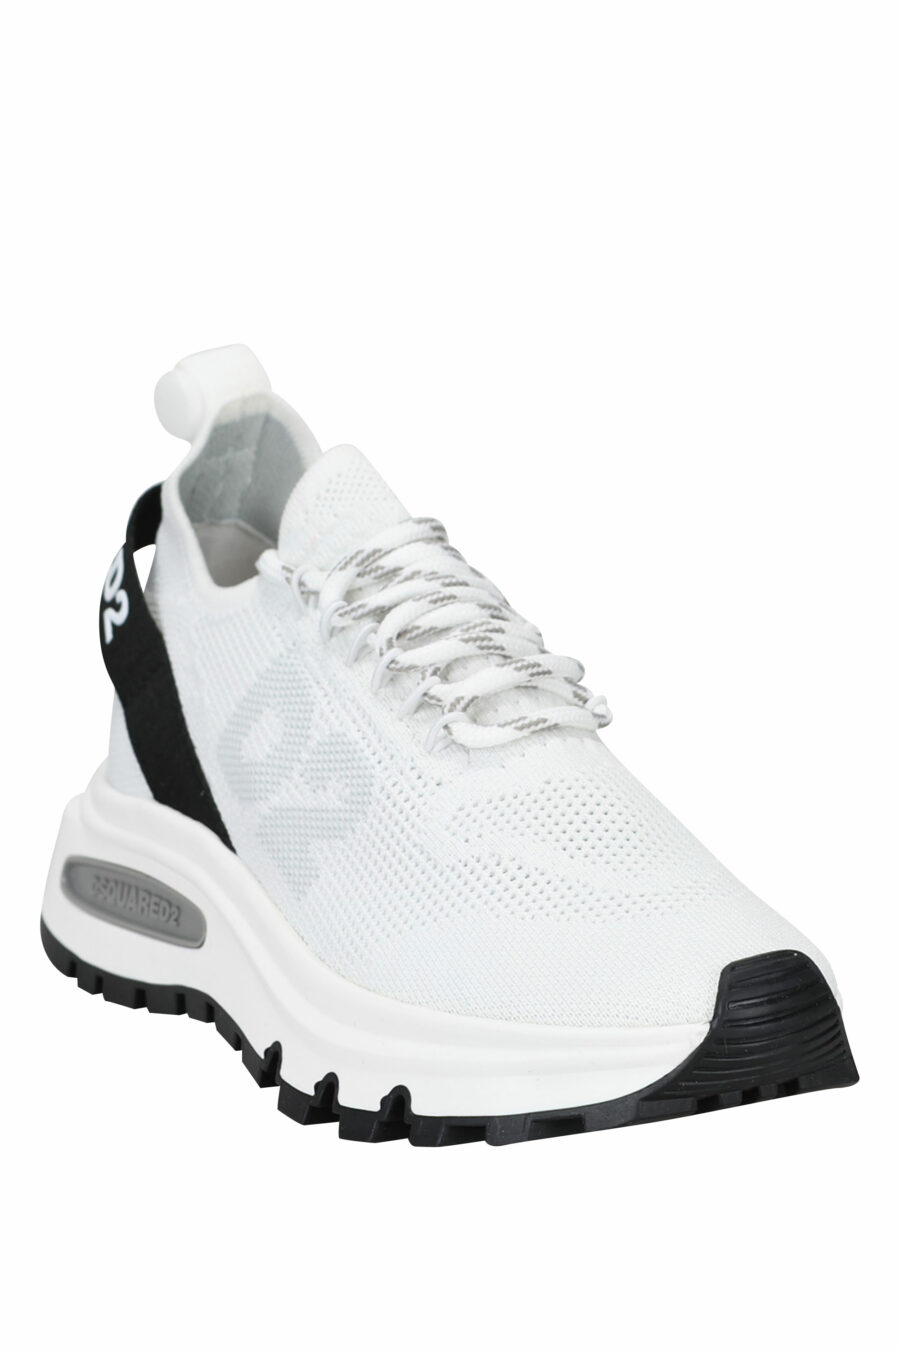 White trainers with black logo and inner tube sole - 8055777249857 1